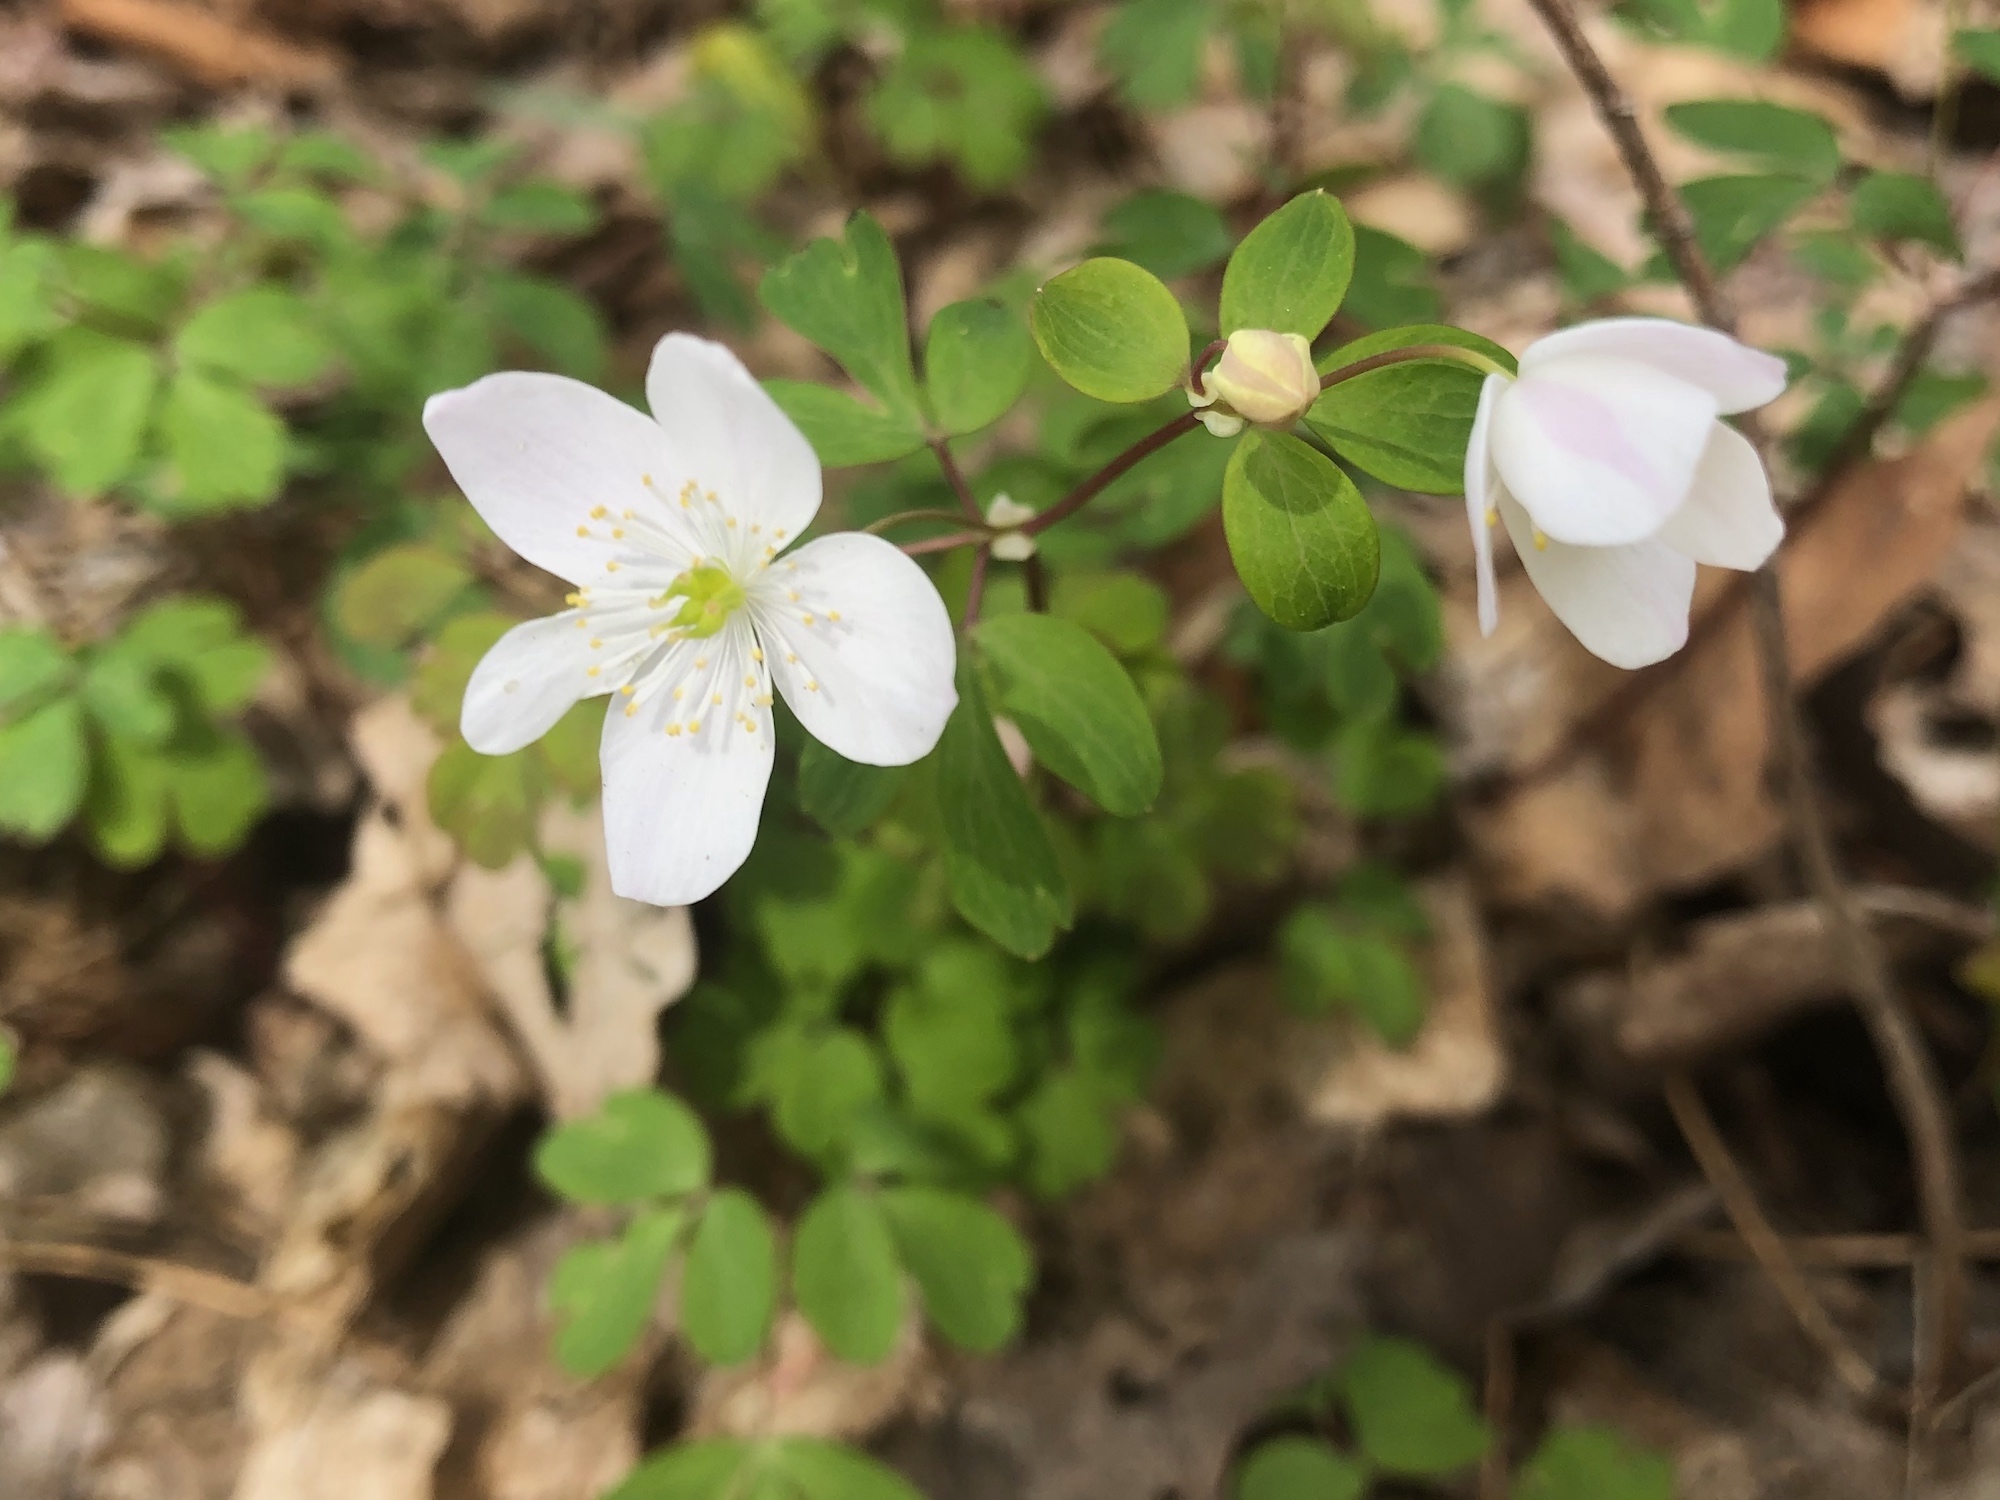 False Rue Anemone in the Maple-Basswood Forest of the University of Wisconsin Arboretum in Madison, Wisconsin on May 4, 2020.